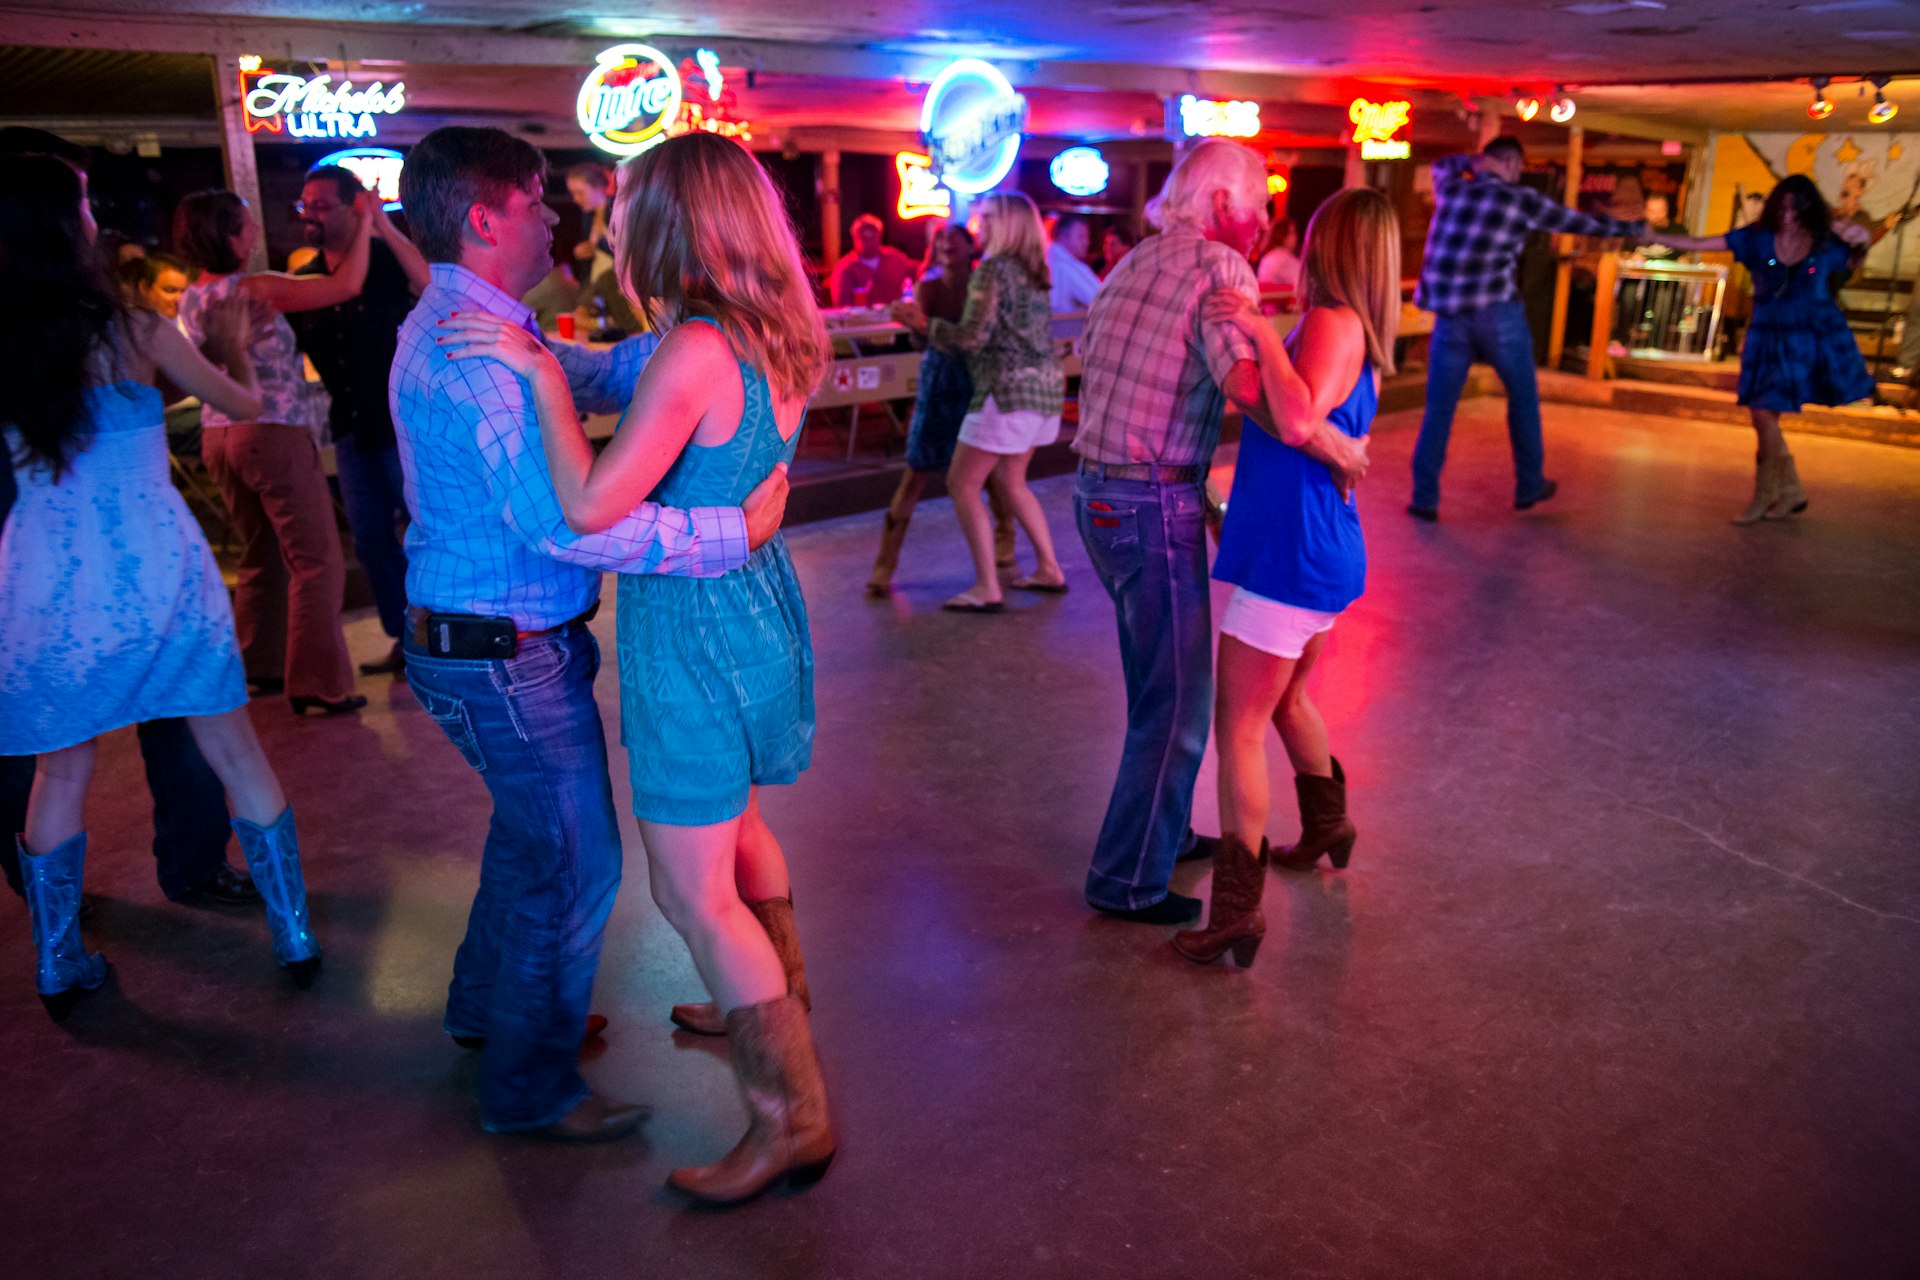 People dancing to country music in the Broken Spoke dance hall in Austin, Texas, USA